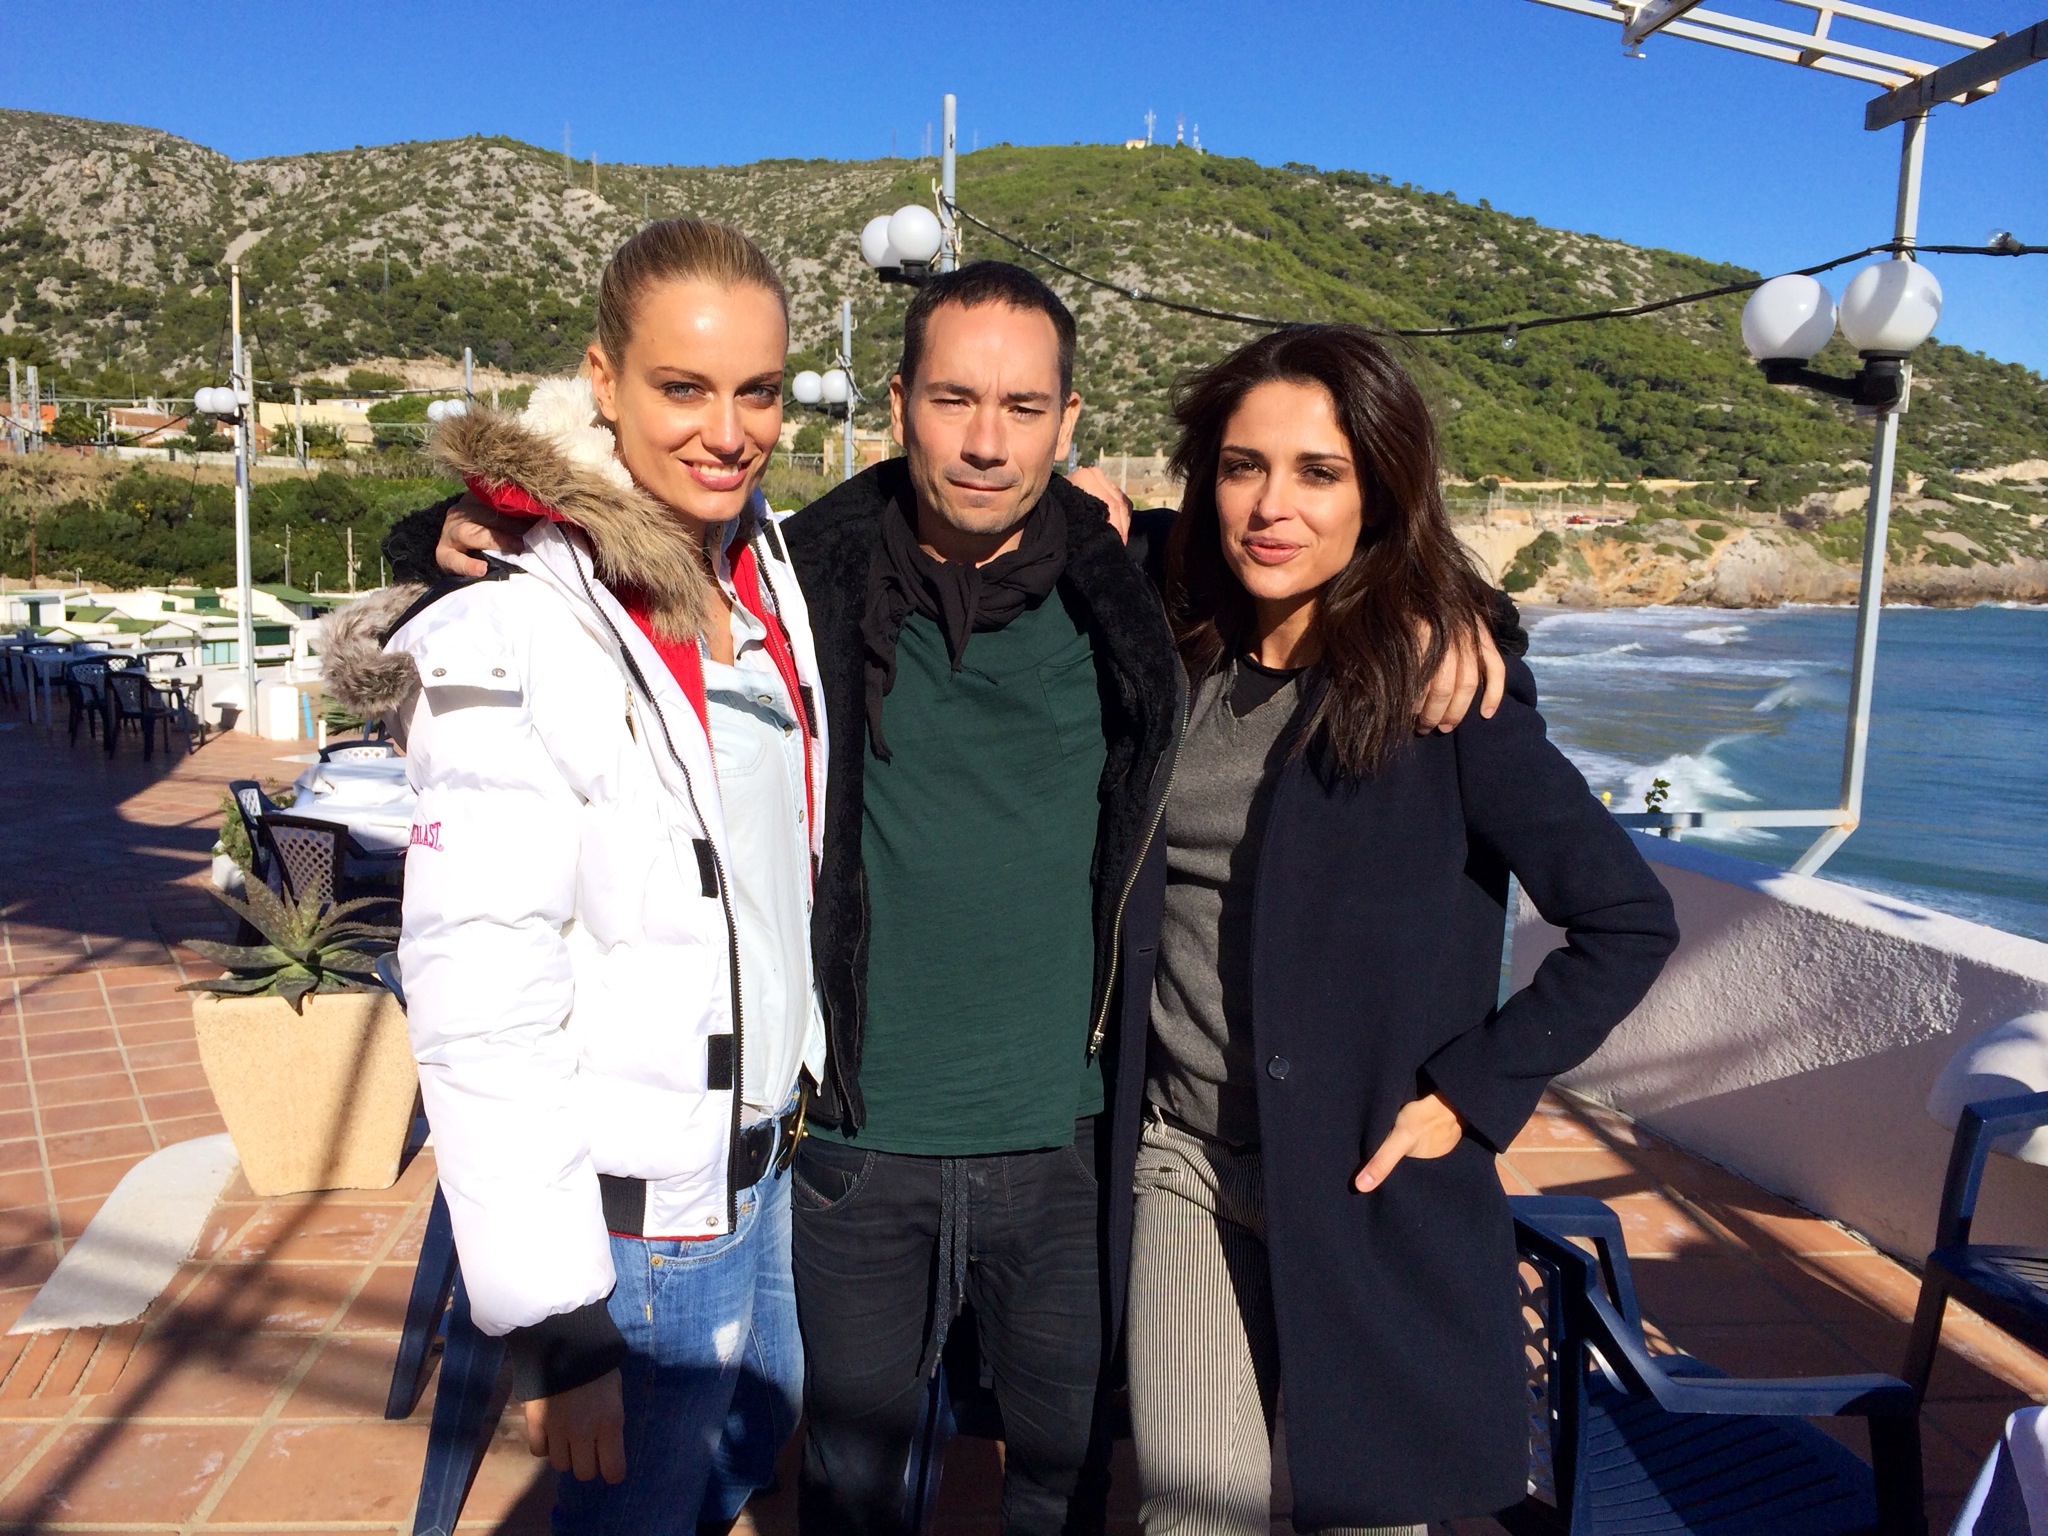 "Shooting done! A nice picture with Alfonso Ohnur (ph.) and my beautiful collegue Sladjana."